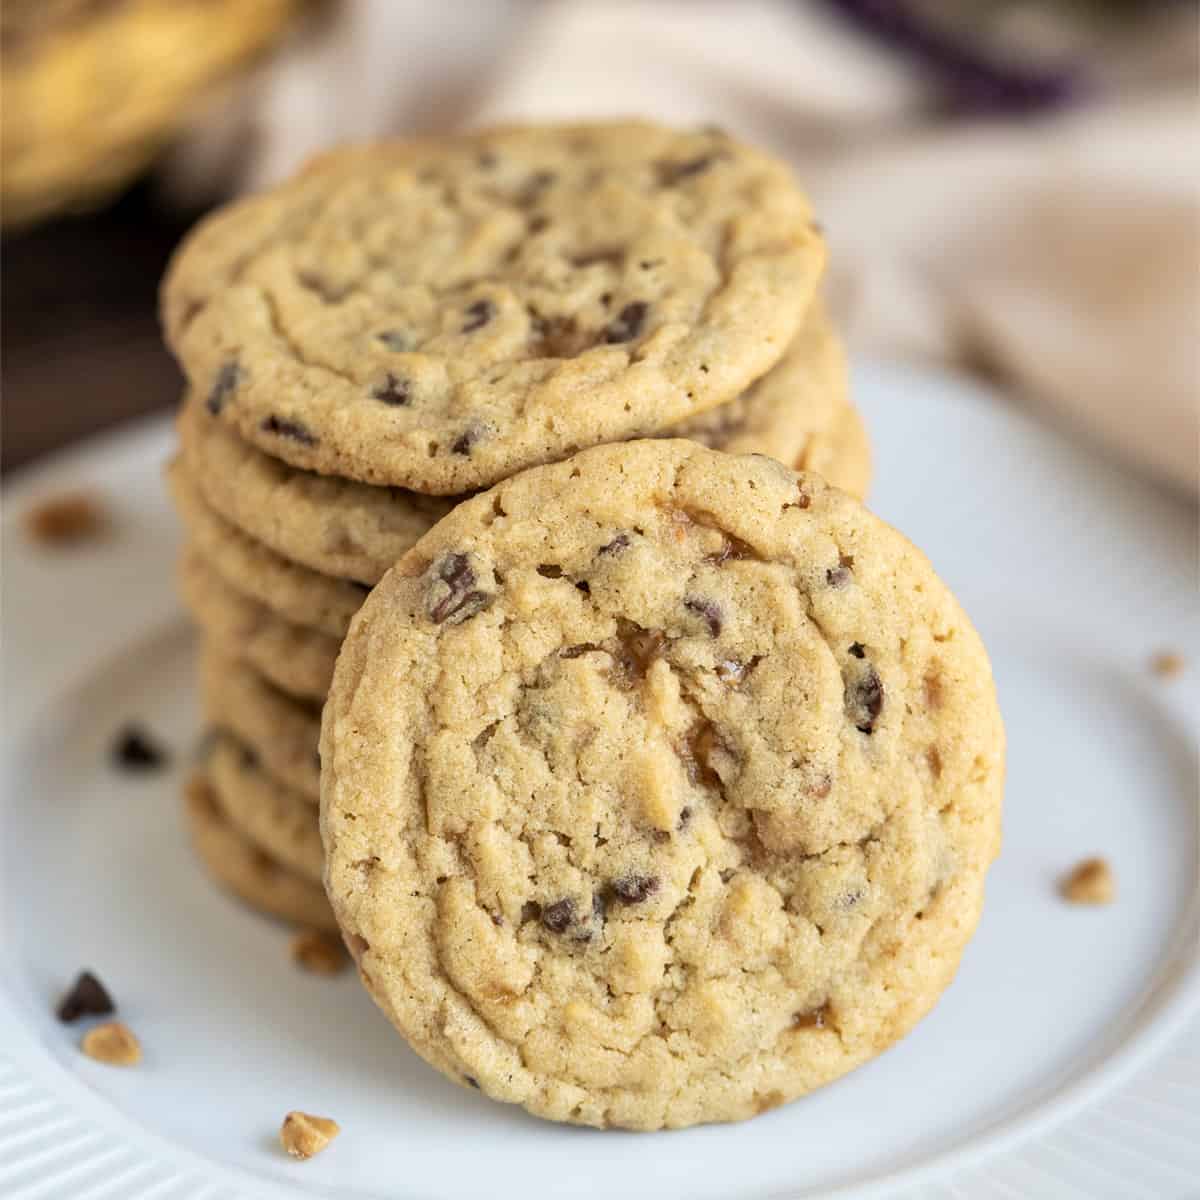 Stack of chocolate toffee cookies and front view on a white plate.